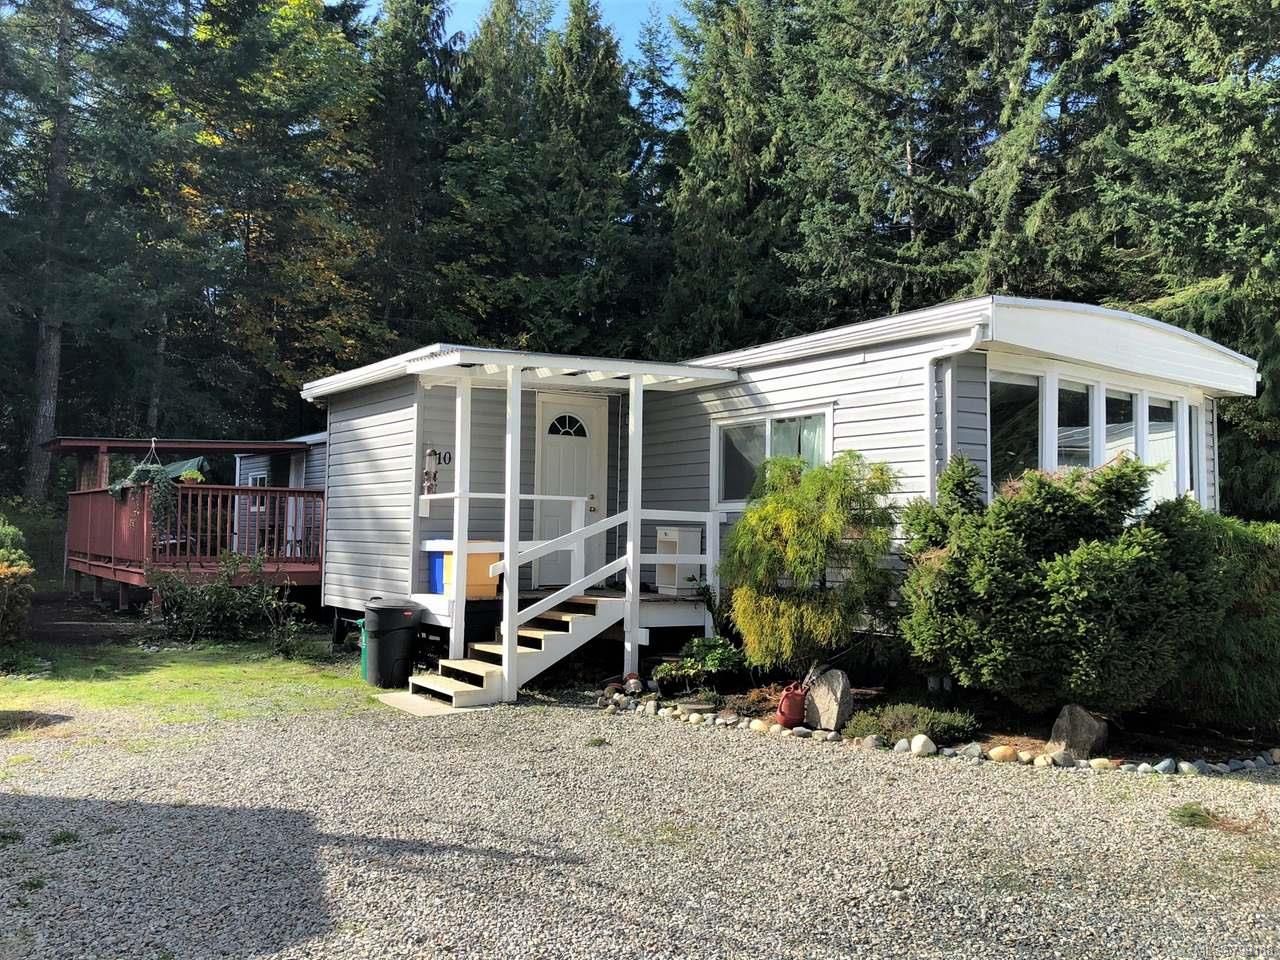 Main Photo: 10 3704 MELROSE ROAD in QUALICUM BEACH: PQ Errington/Coombs/Hilliers Manufactured Home for sale (Parksville/Qualicum)  : MLS®# 799188